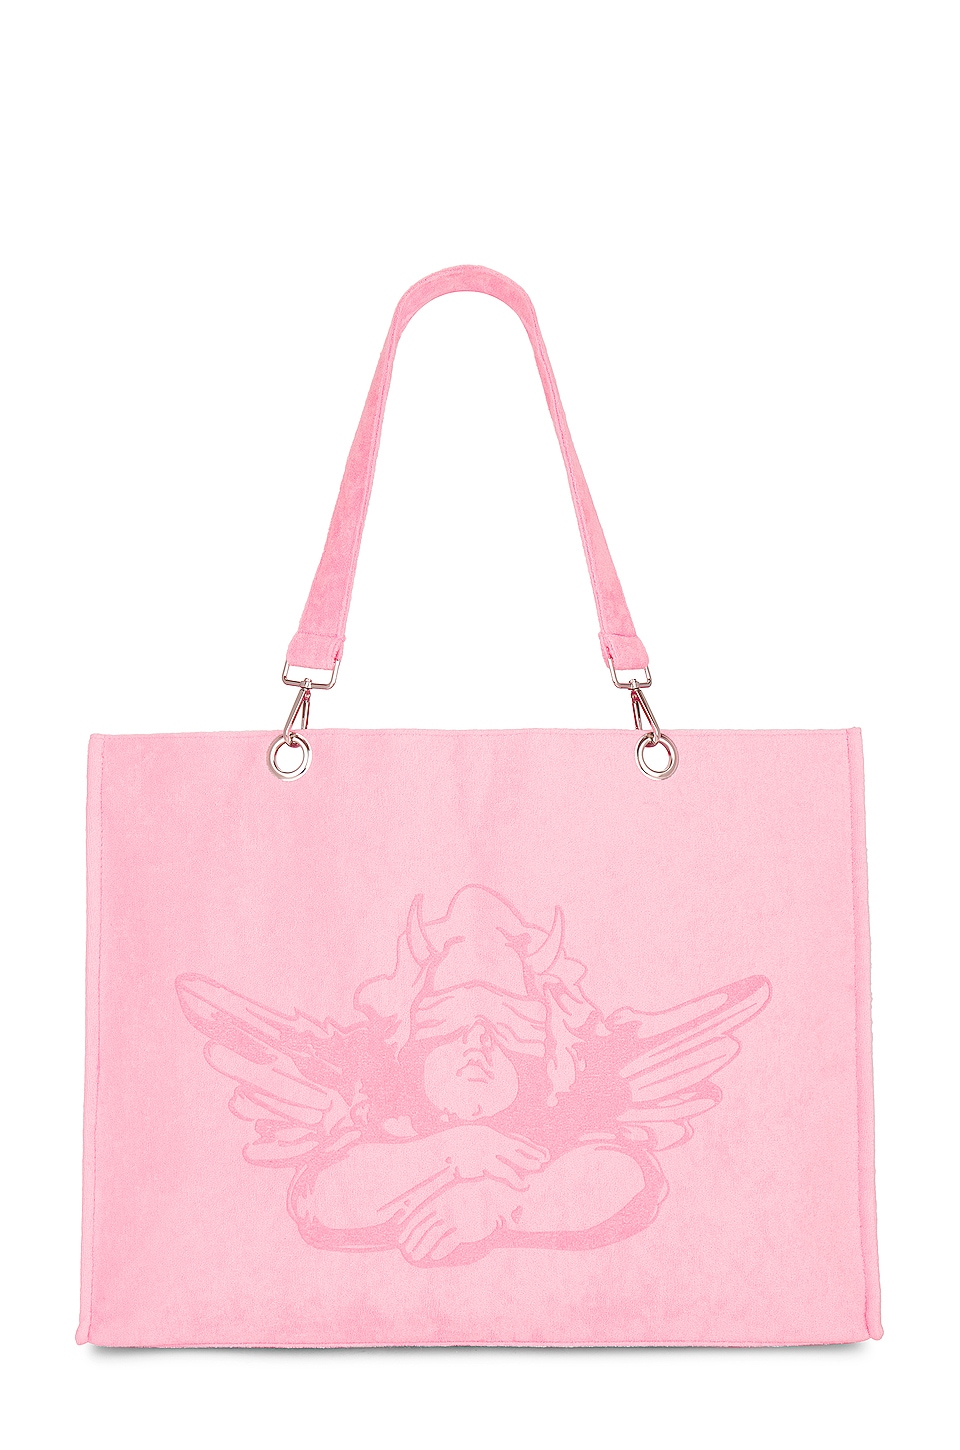 Boys Lie Terrycloth Tote Bag in Pinky | REVOLVE